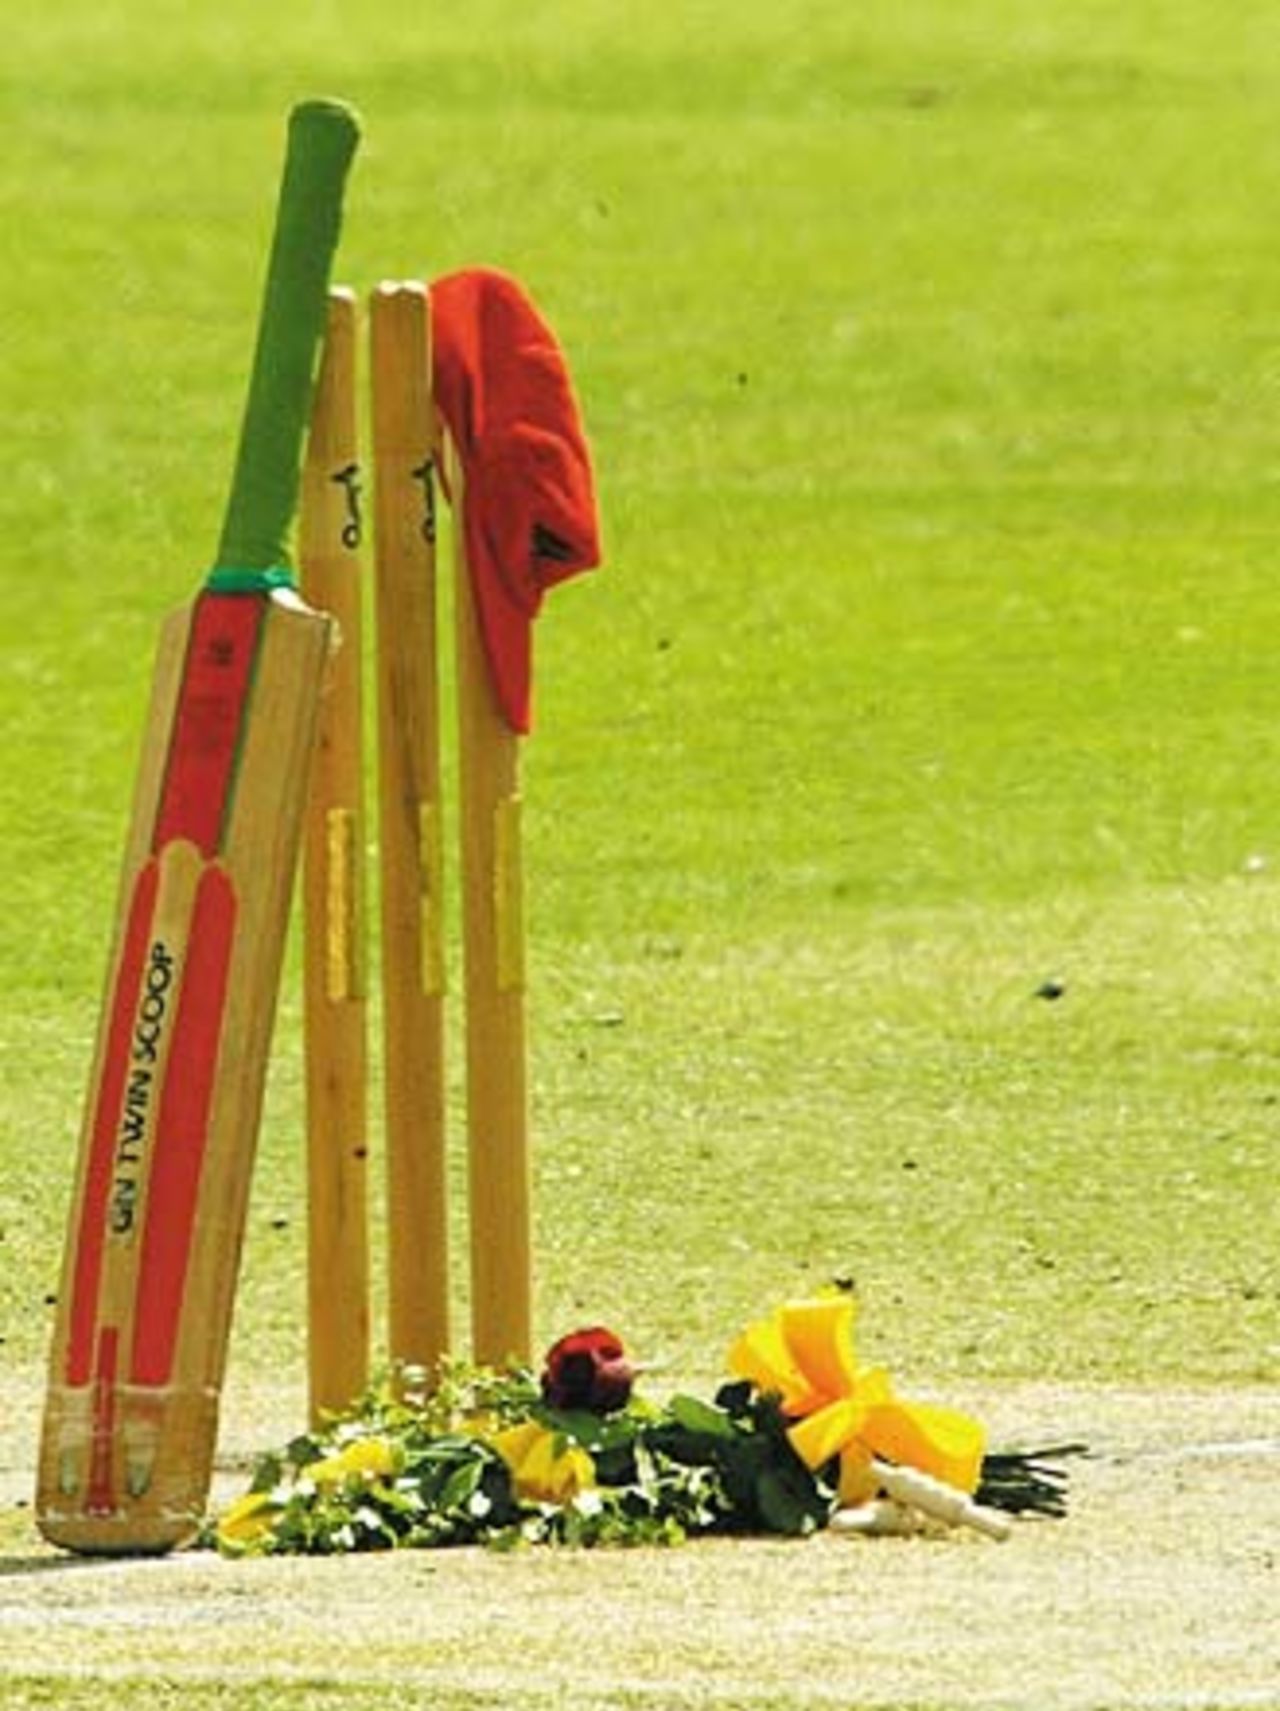 The set of stumps used in David Hookes' last game as well as a bat and red cap are arranged in tribute, Adelaide, January 27, 2004